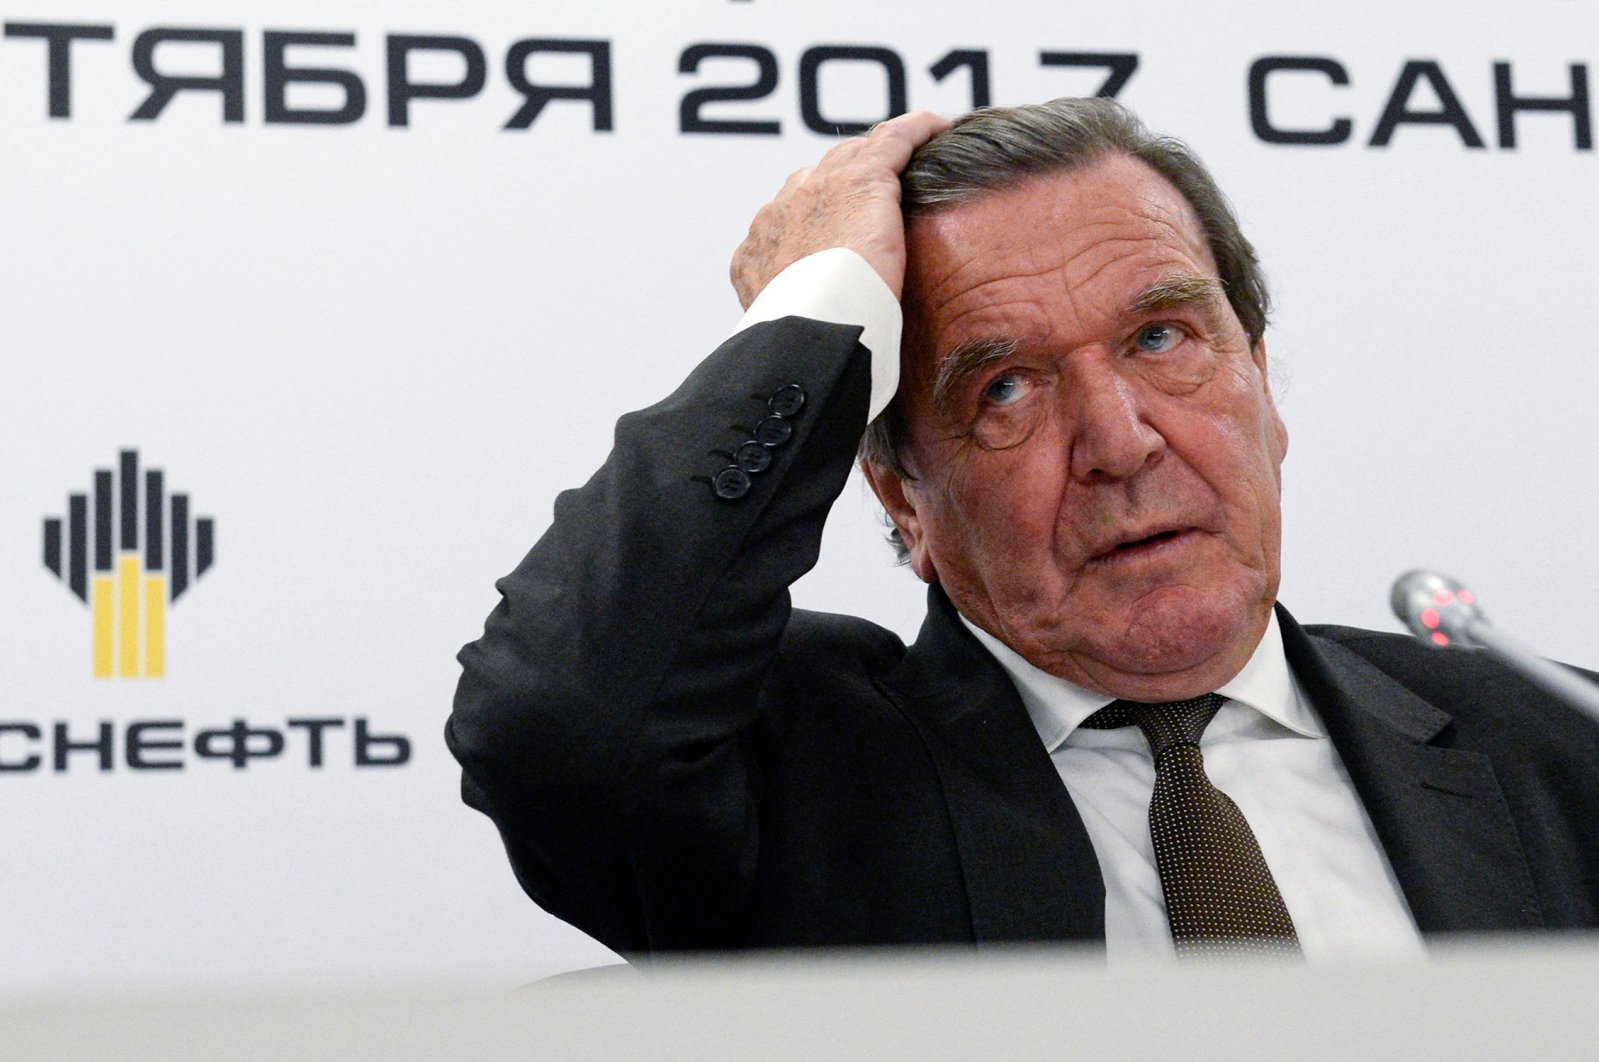 In this file photo taken on Sept. 29, 2017, former German Chancellor Gerhard Schroeder, then newly elected chairperson of the board of directors of Russia&#039;s oil giant Rosneft, reacts as he attends a briefing in Saint Petersburg, Russia. (AFP Photo)